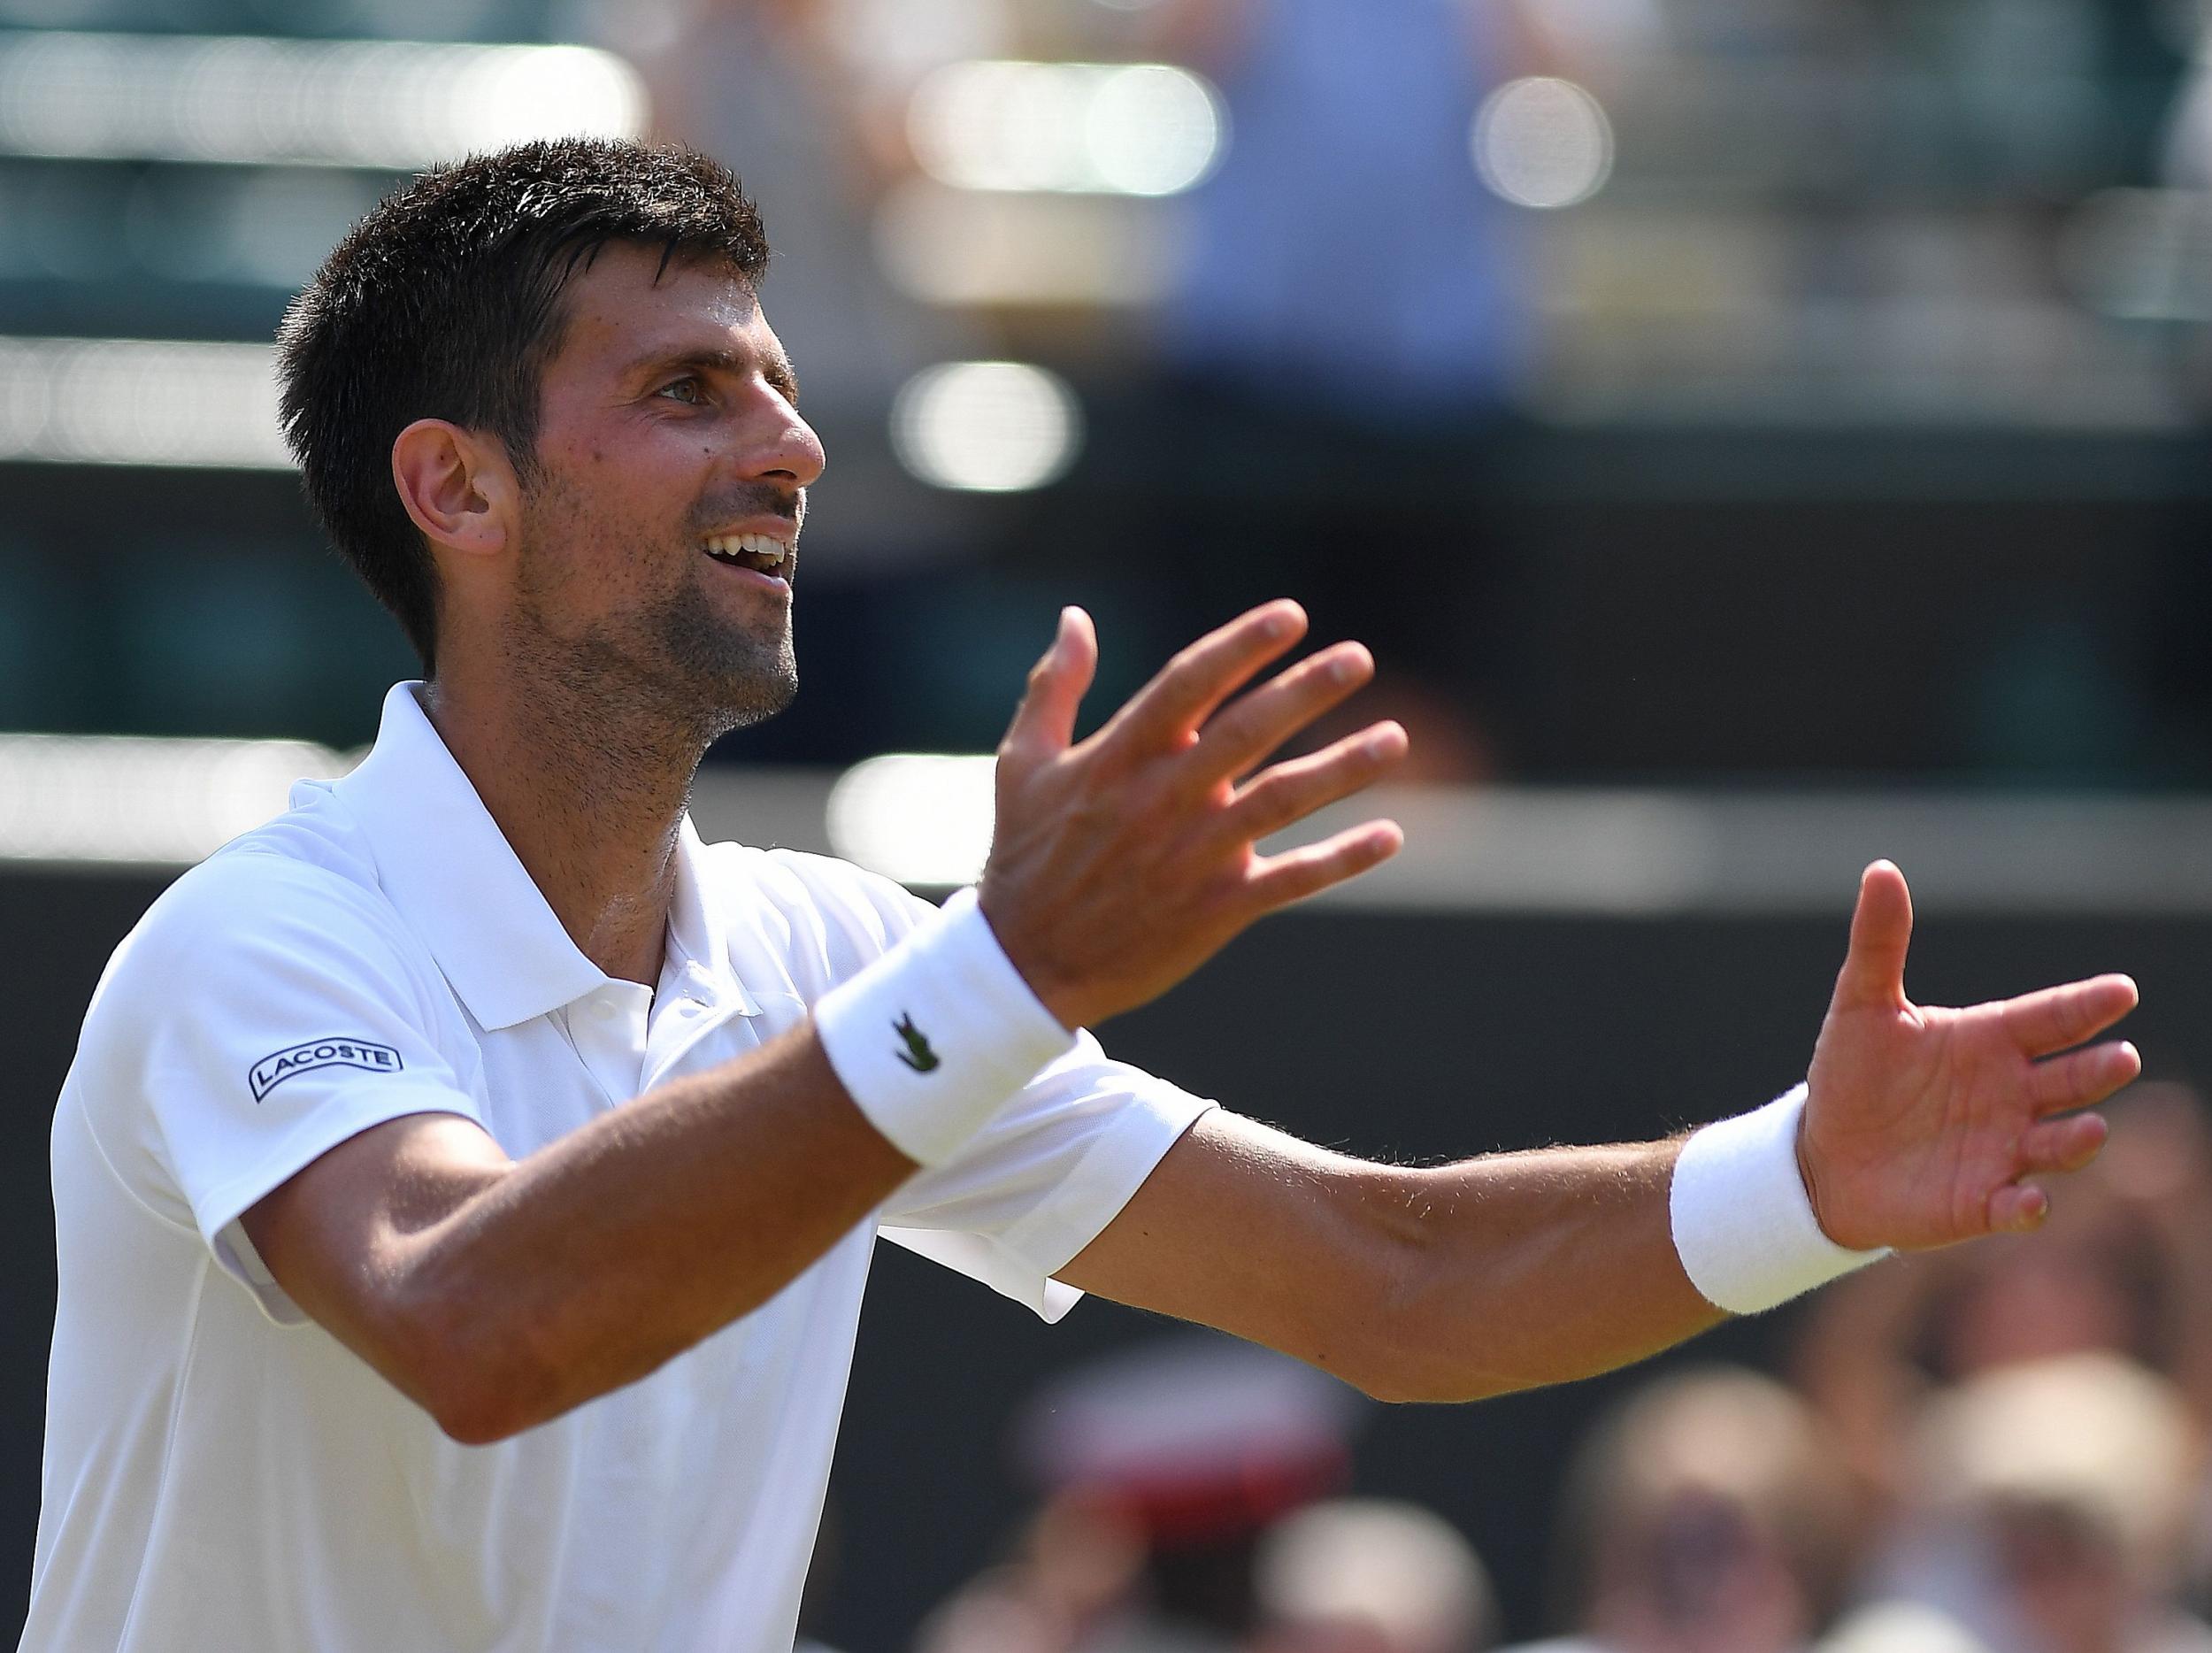 The former World No 1 is through to the third round of Wimbledon